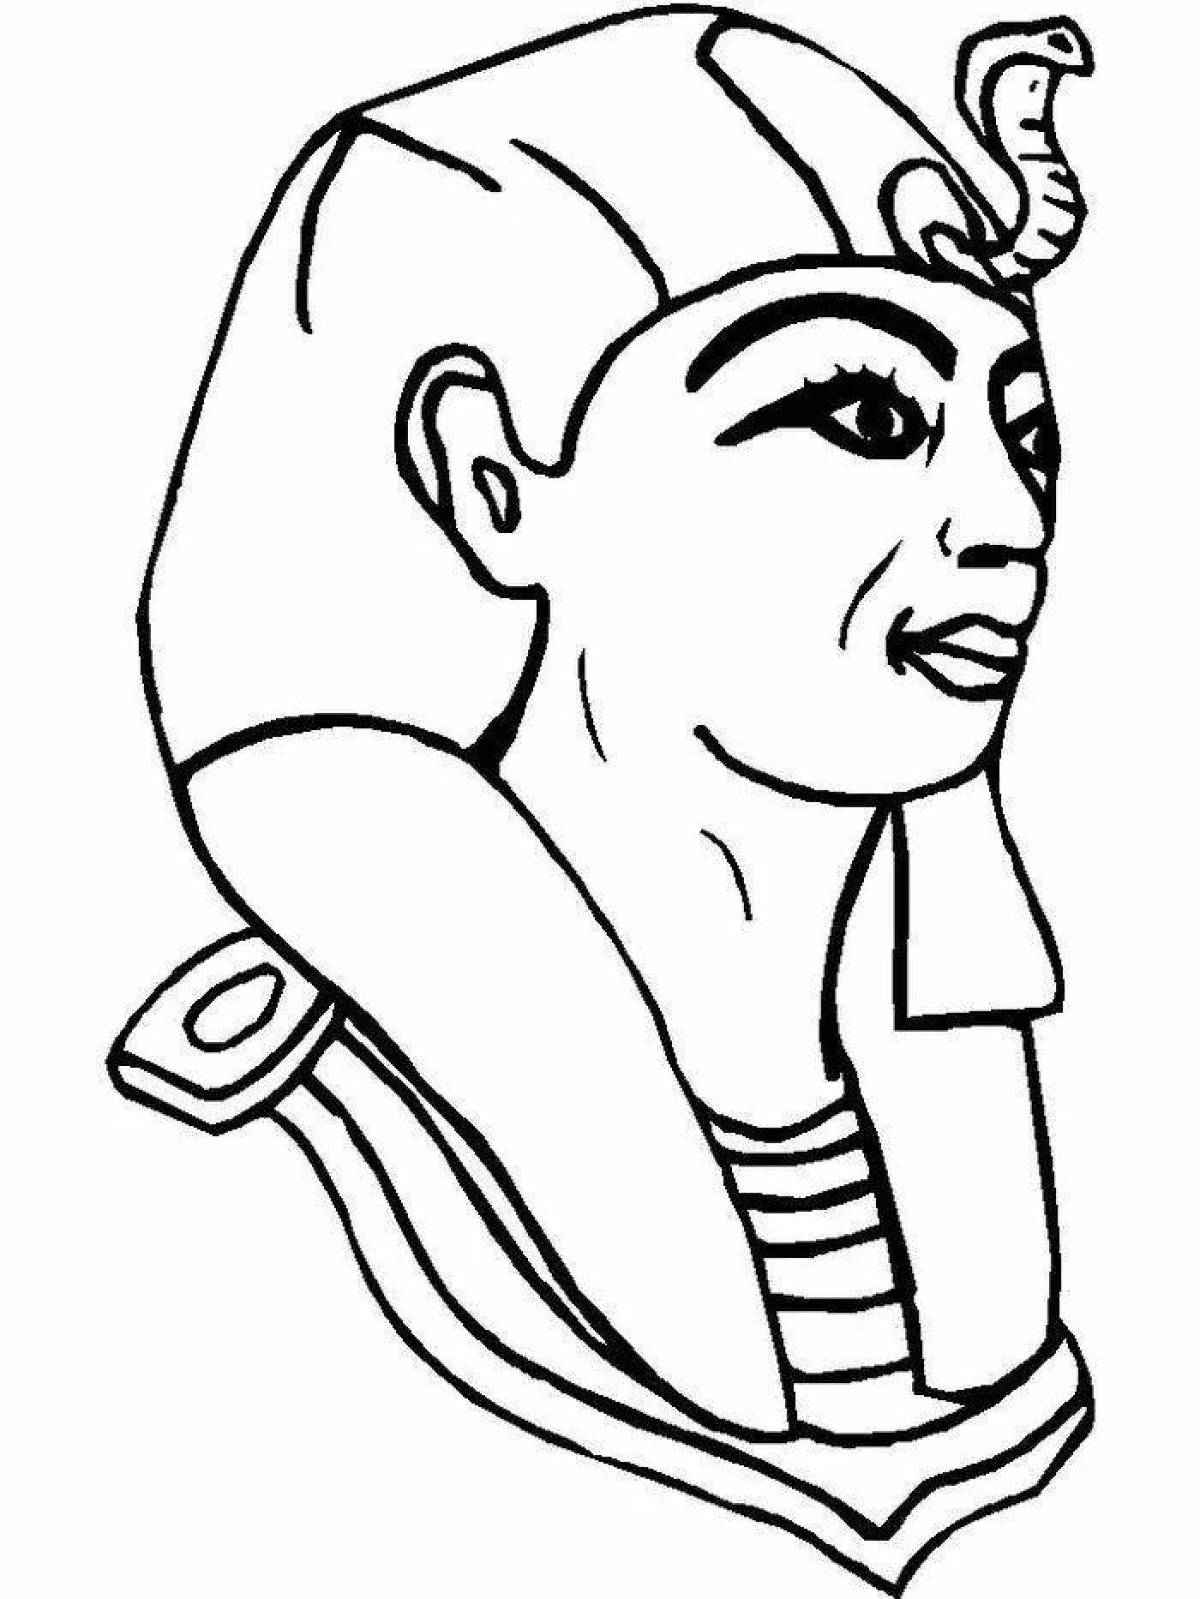 Majestic pharaoh coloring page